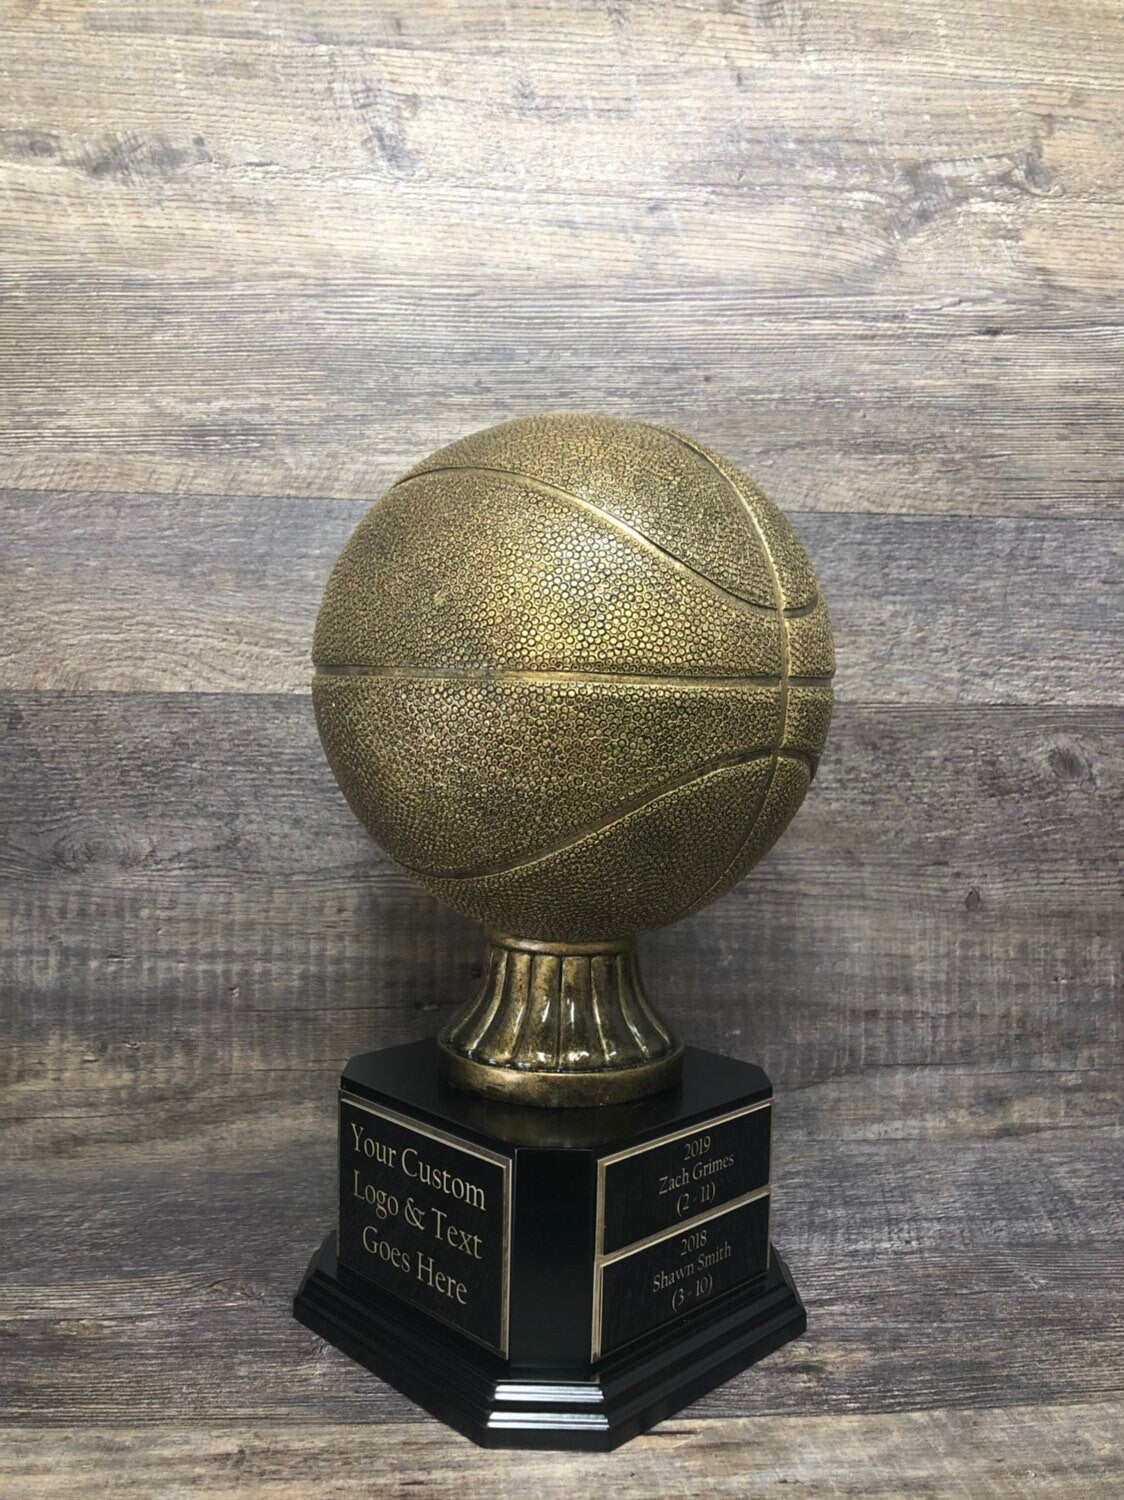 Fantasy Basketball Madness FULL SIZE Antique Gold Basketball 6 / 12  Perpetual Trophy League Bracket Winner Fantasy Basketball Award Trophy